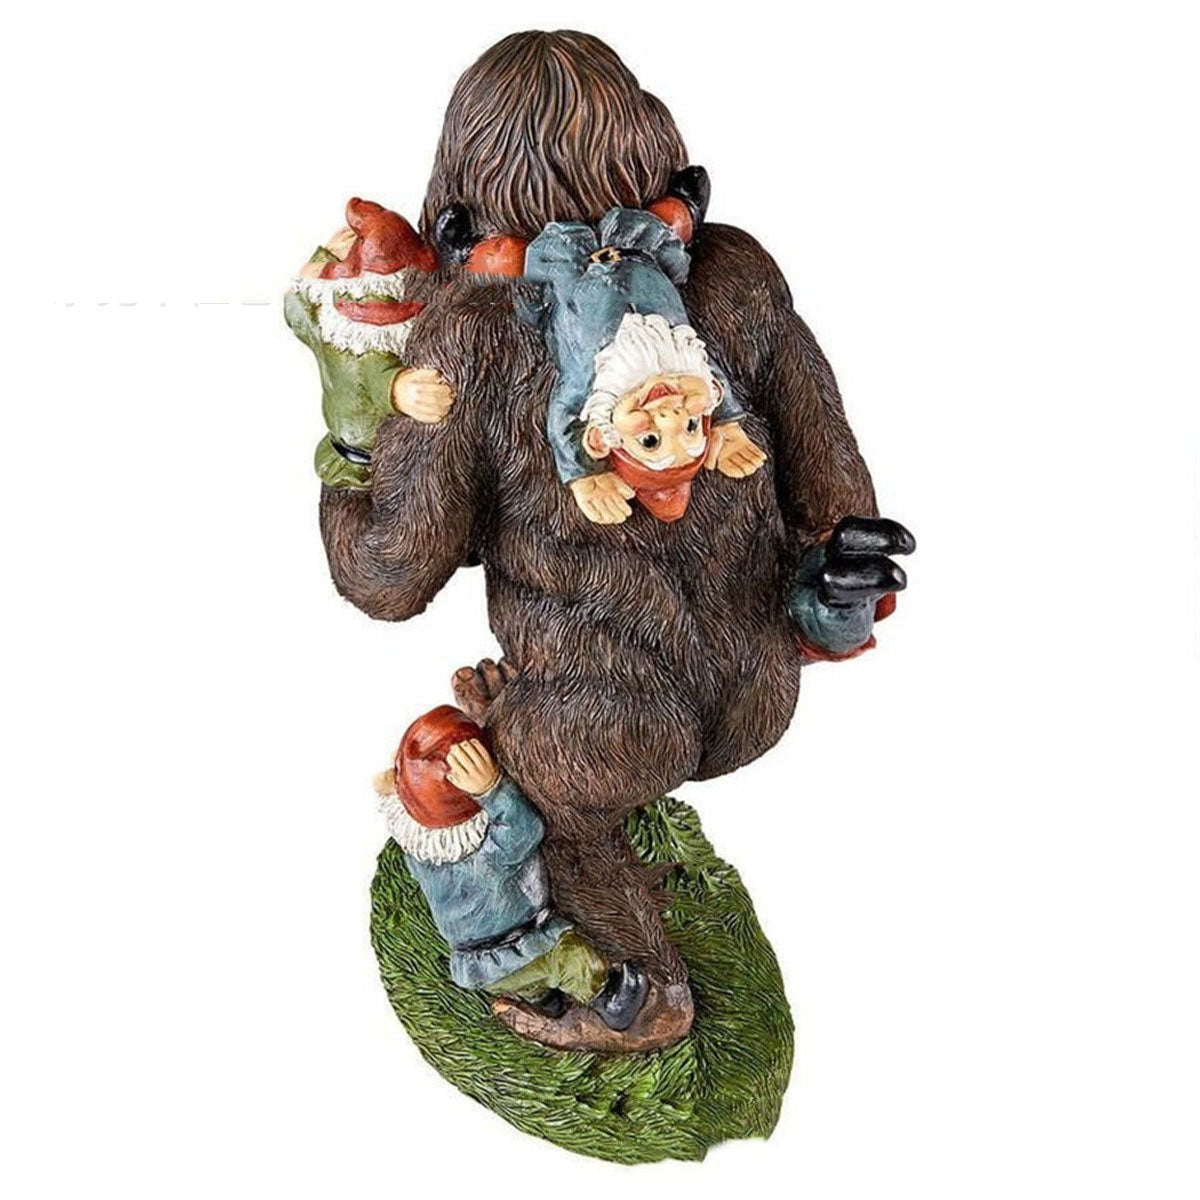 Garden gnomes, Lawn gnomes, Outdoor gnomes, Yard gnomes, Ceramic gnomes, Concrete gnomes, Resin gnomes, Funny gnomes, Classic gnomes, Cute gnomes, Gnome statues, Decorative gnomes, Fantasy gnomes, Hand-painted gnomes, Whimsical gnomes, Gnome figurines, Novelty gnomes, Gnome with wheelbarrow, Gnome with mushroom, Gnome with lantern,, Gorilla Resin Crafts Garden Home Decoration Statue Ornaments, 